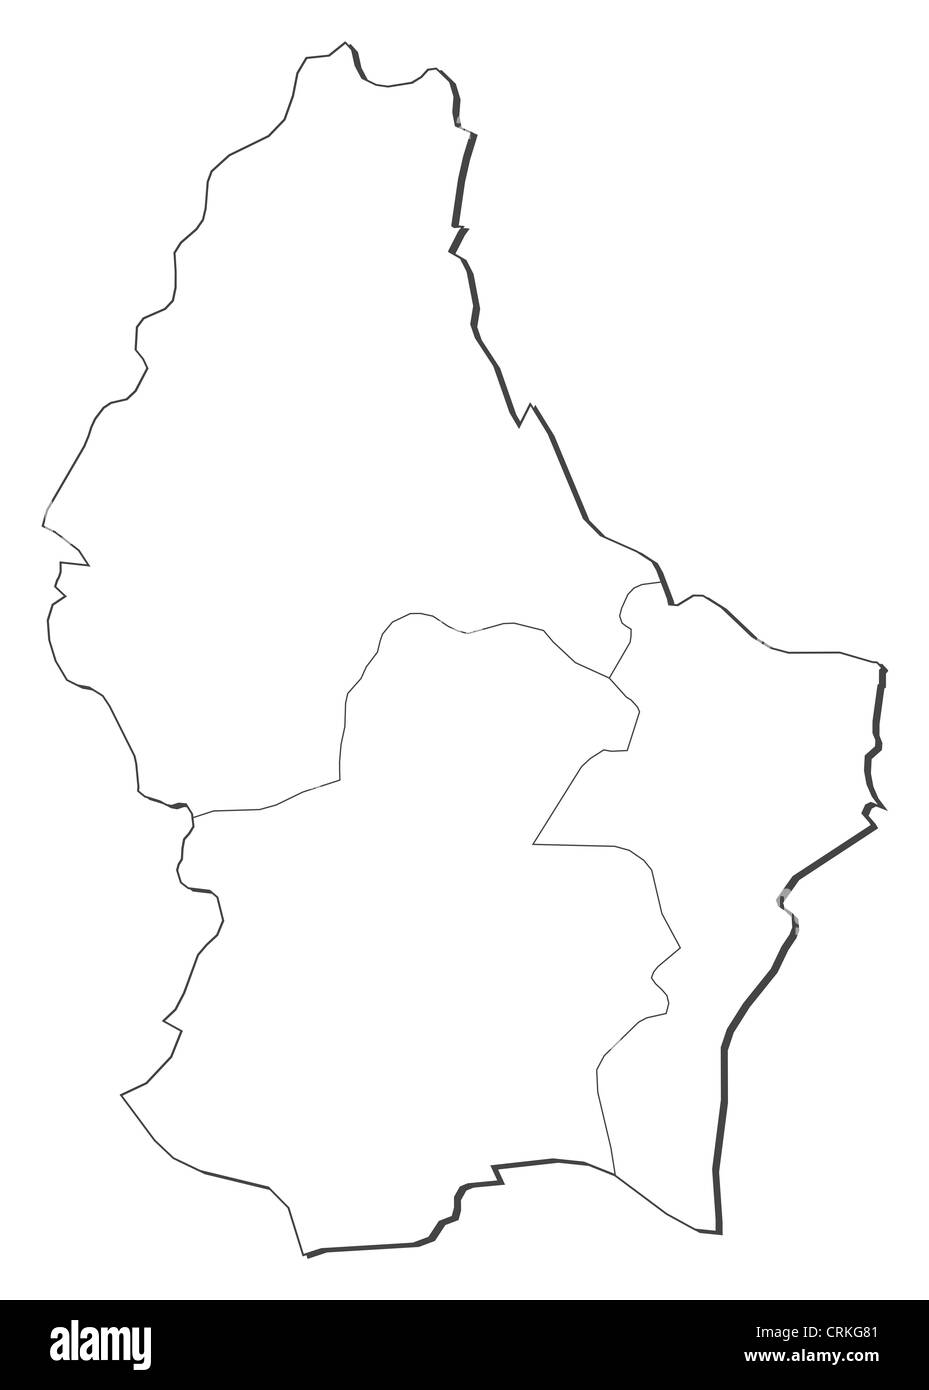 Political map of Luxembourg with the several Districts. Stock Photo